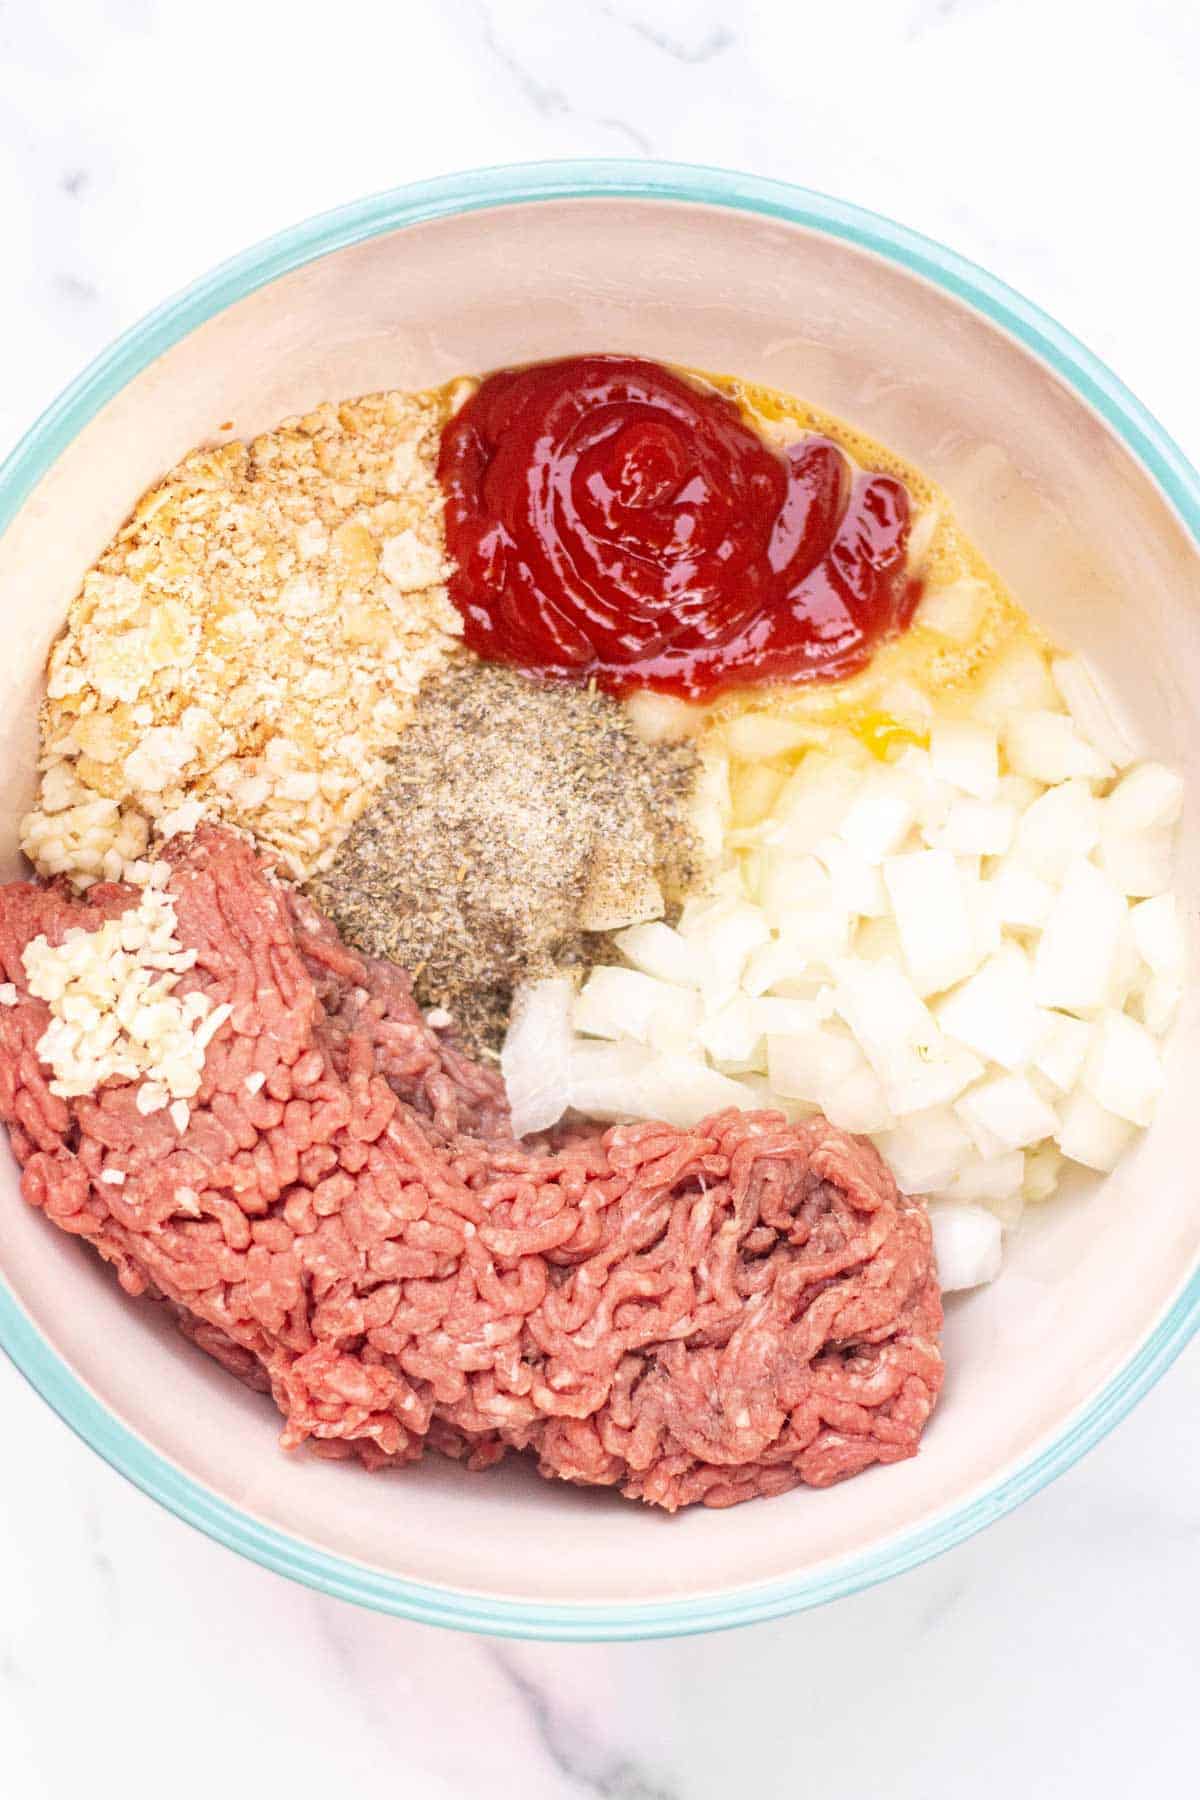 Meatloaf ingredients in a large mixing bowl